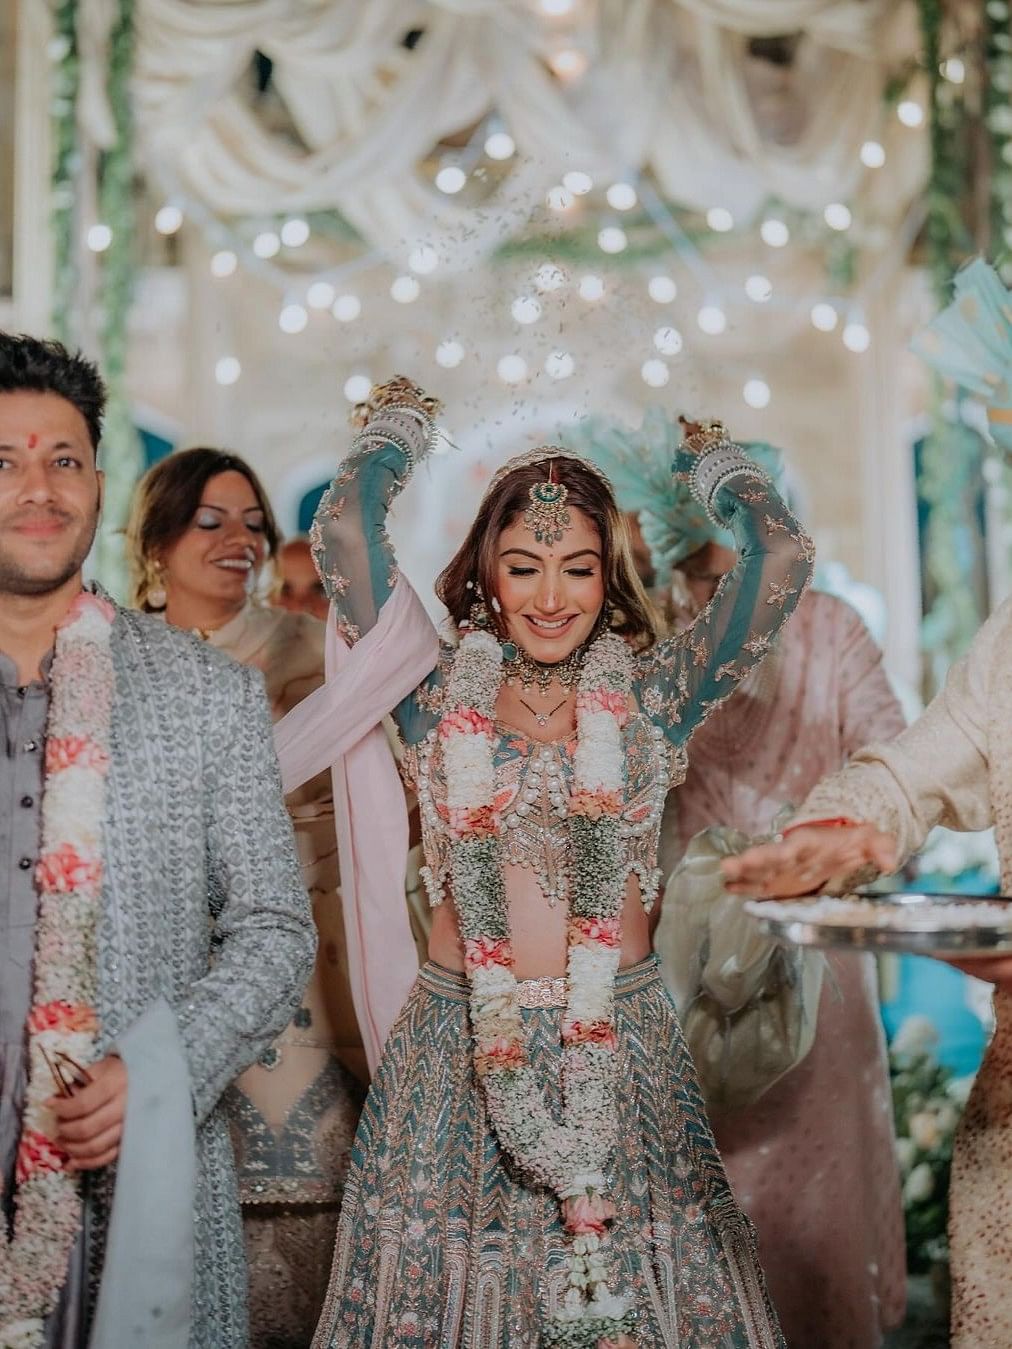 Surbhi took to social media to share a glimpse into her fairytale wedding, much to the delight her fans and followers.